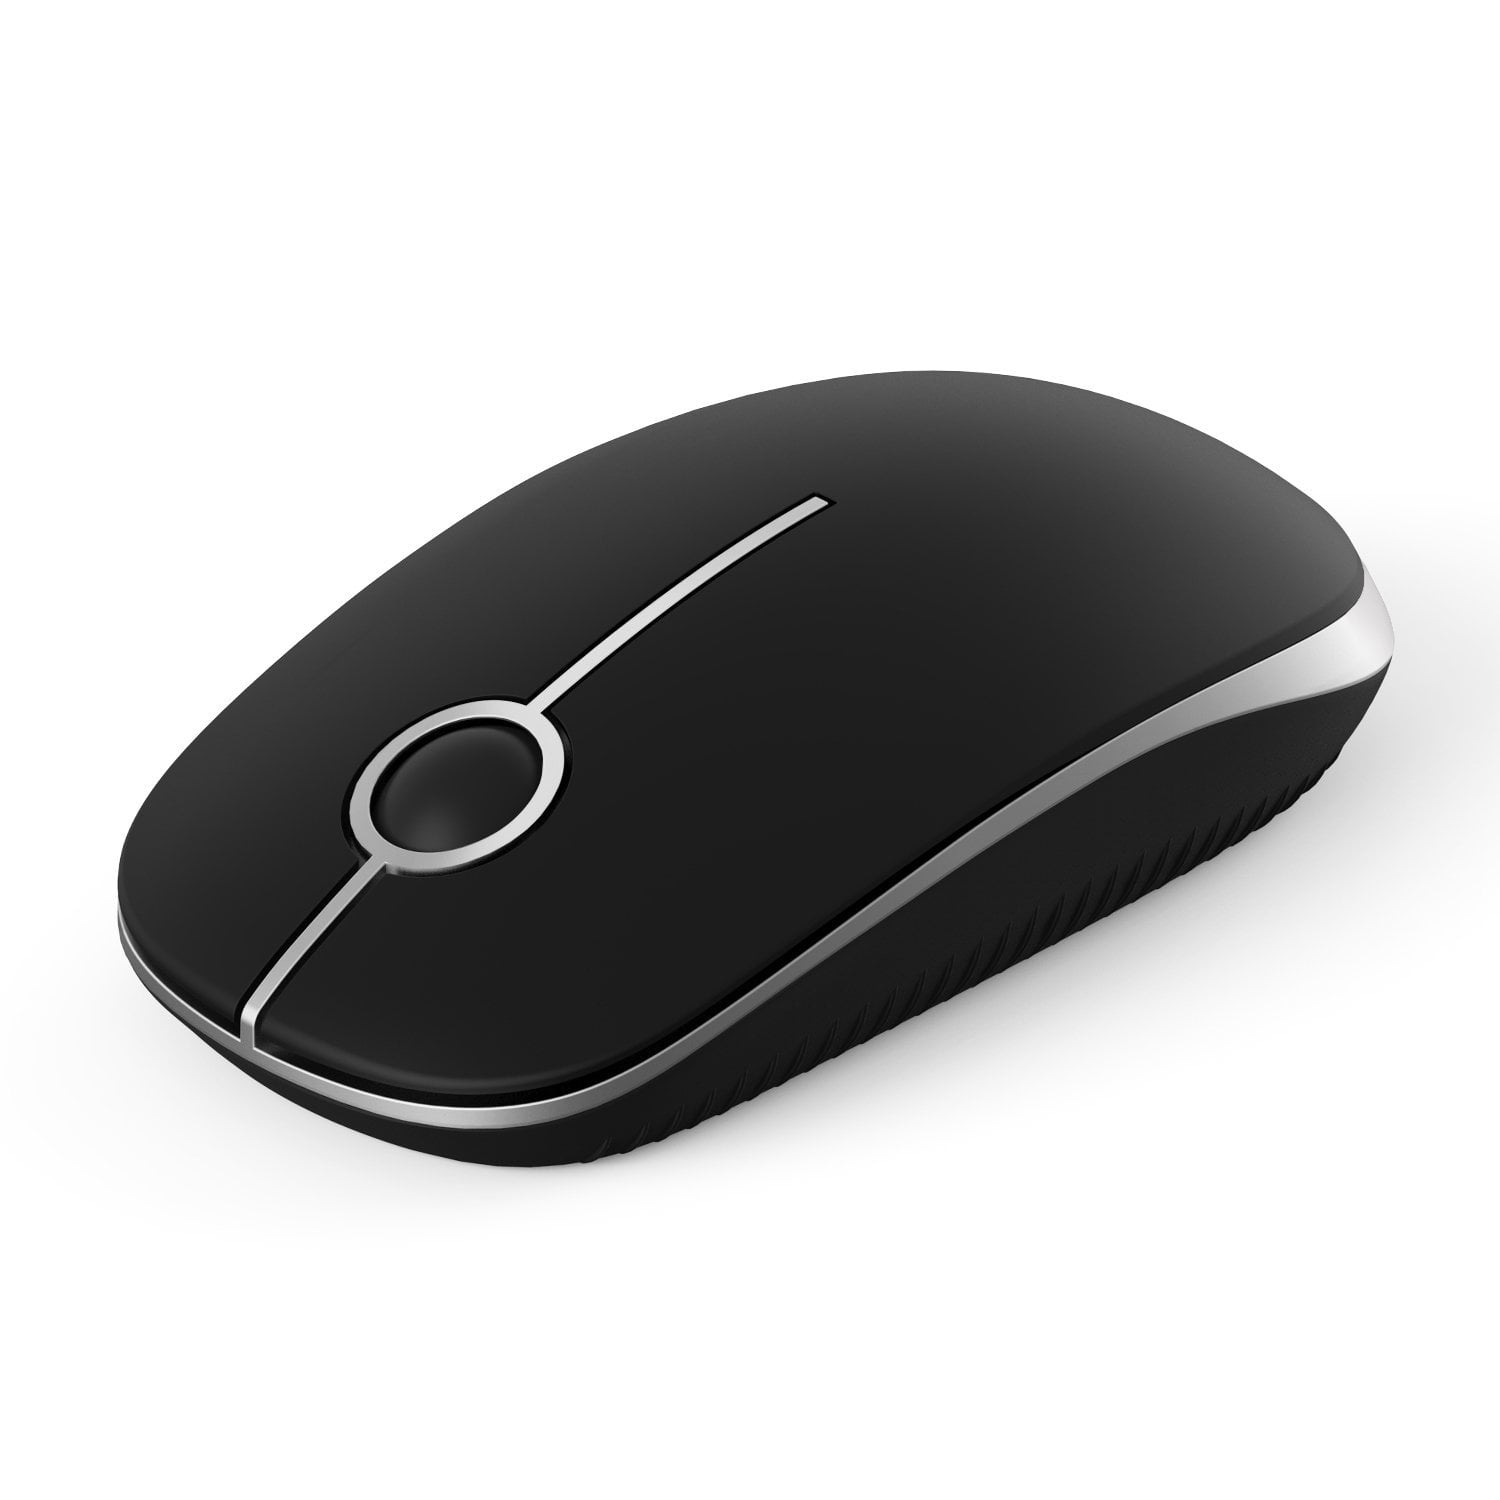 mouse clicker device